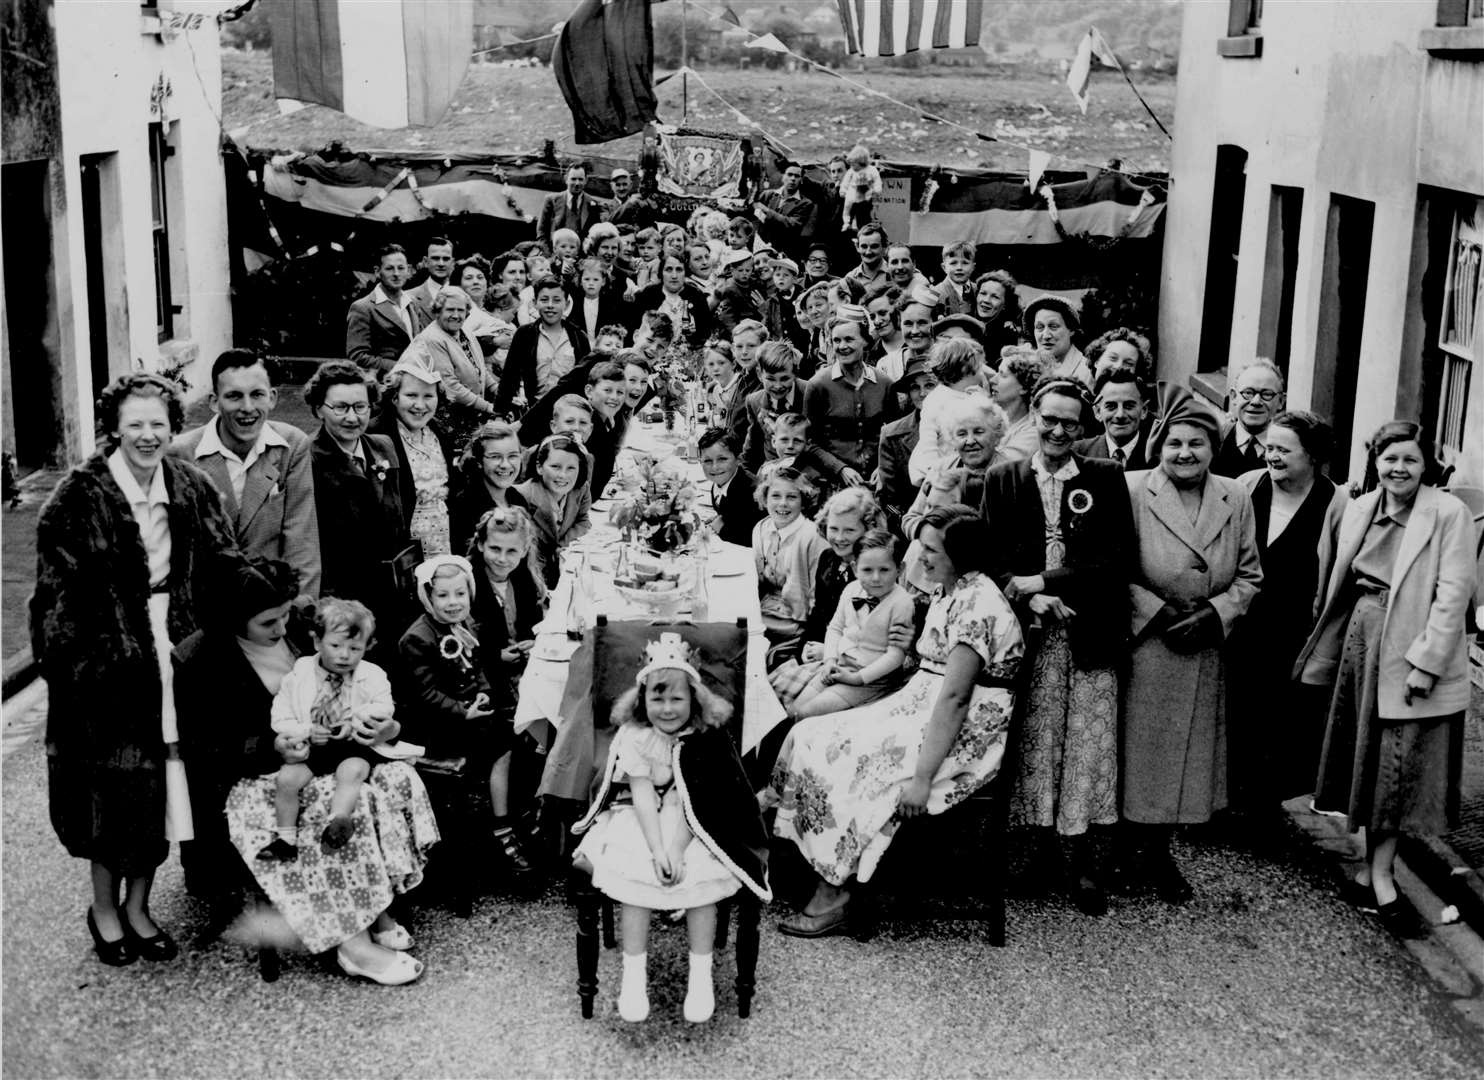 Smiling faces all round at this street party in New Town Street, Canterbury, to mark the coronation in June 1953